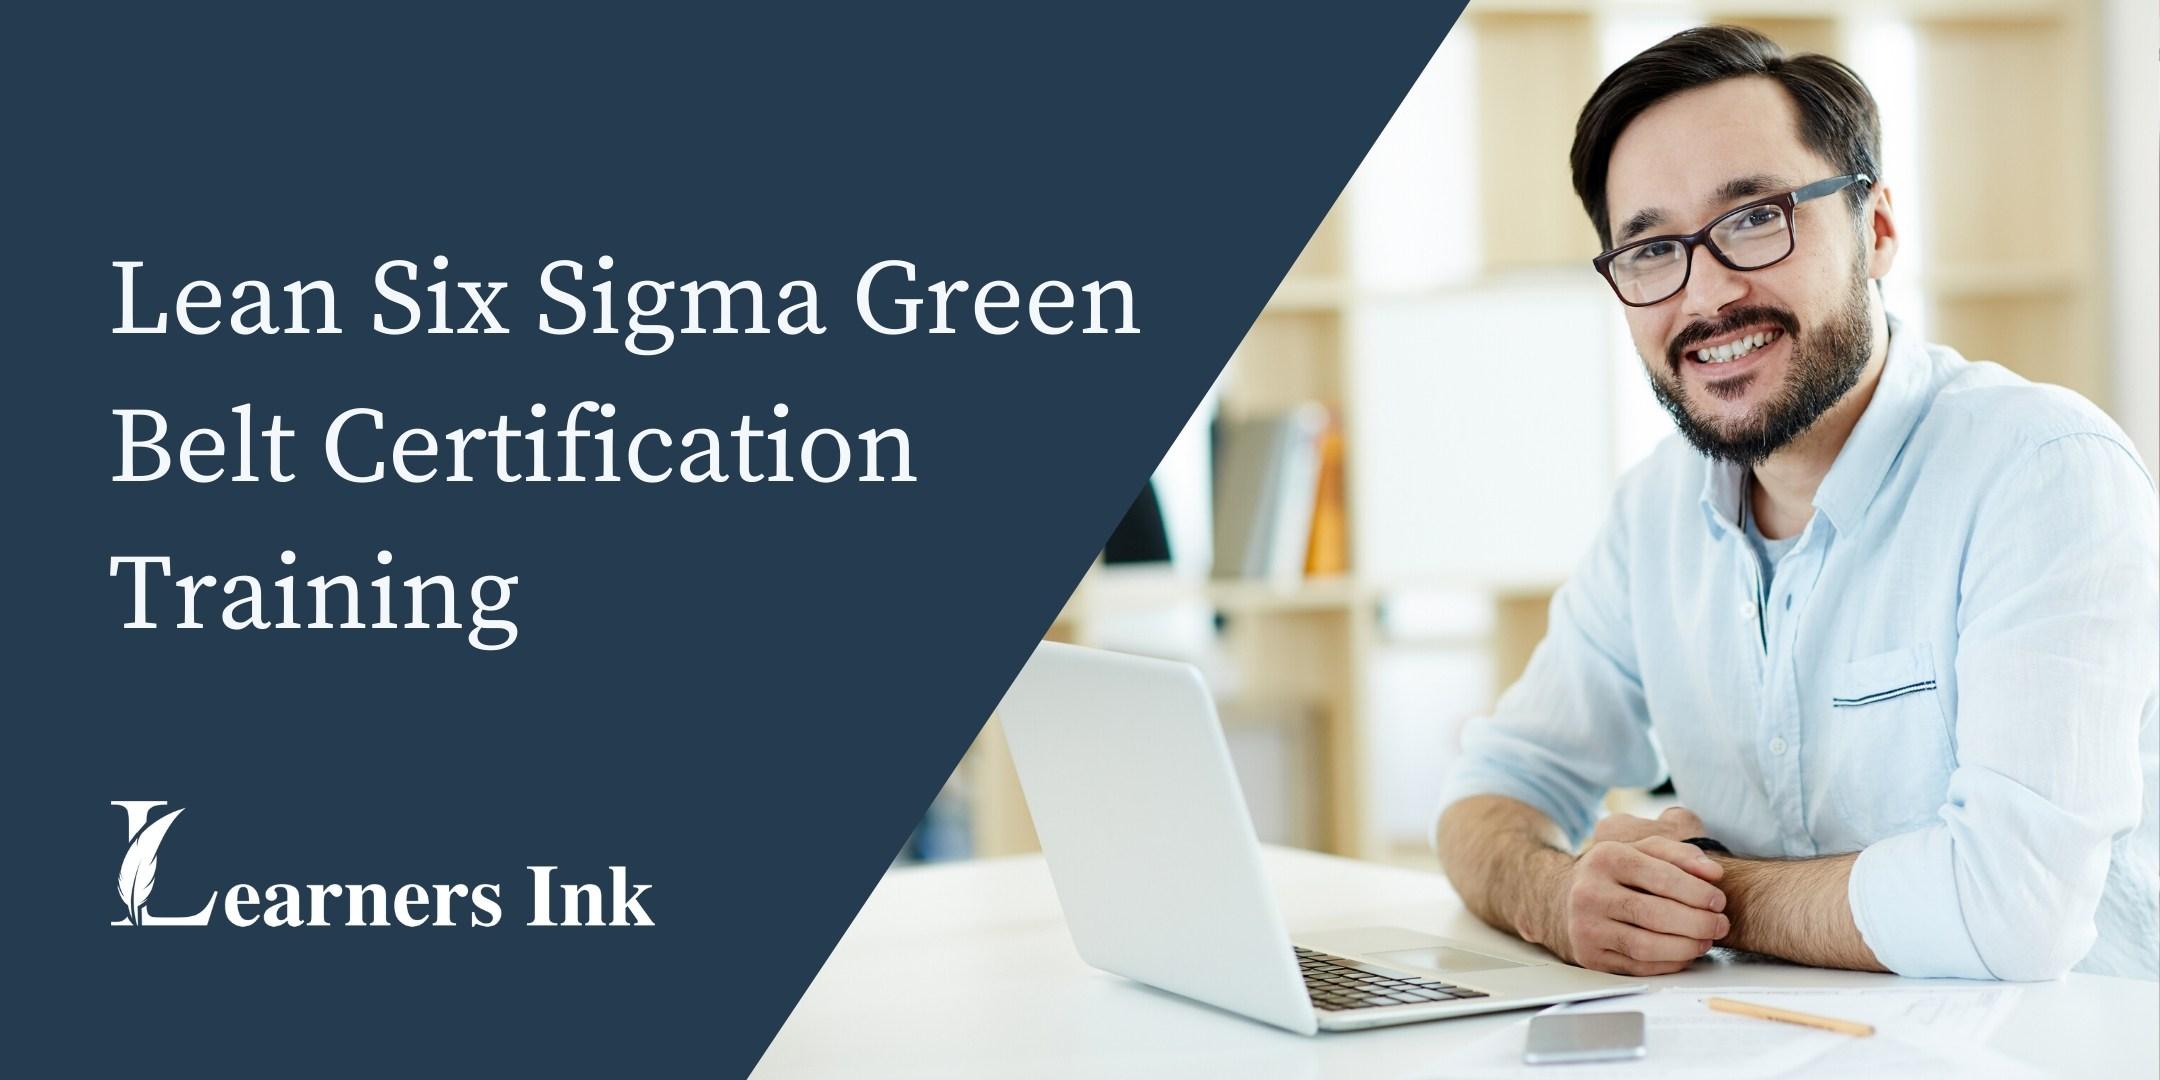 Lean Six Sigma Green Belt Certification Training Course (LSSGB) in Young